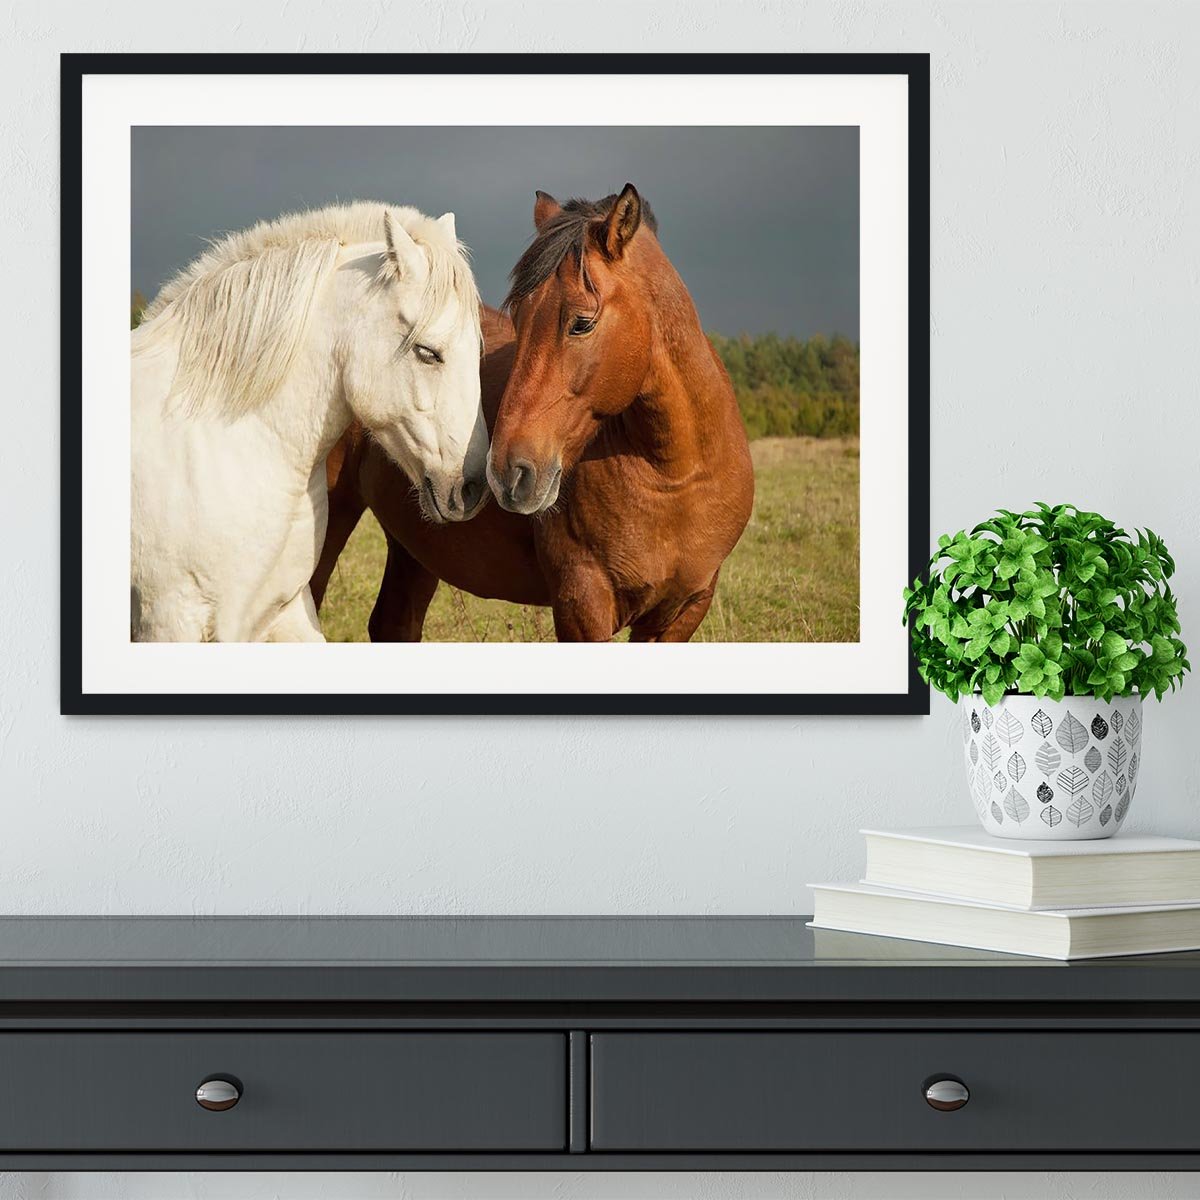 A pair of horses showing affection Framed Print - Canvas Art Rocks - 1